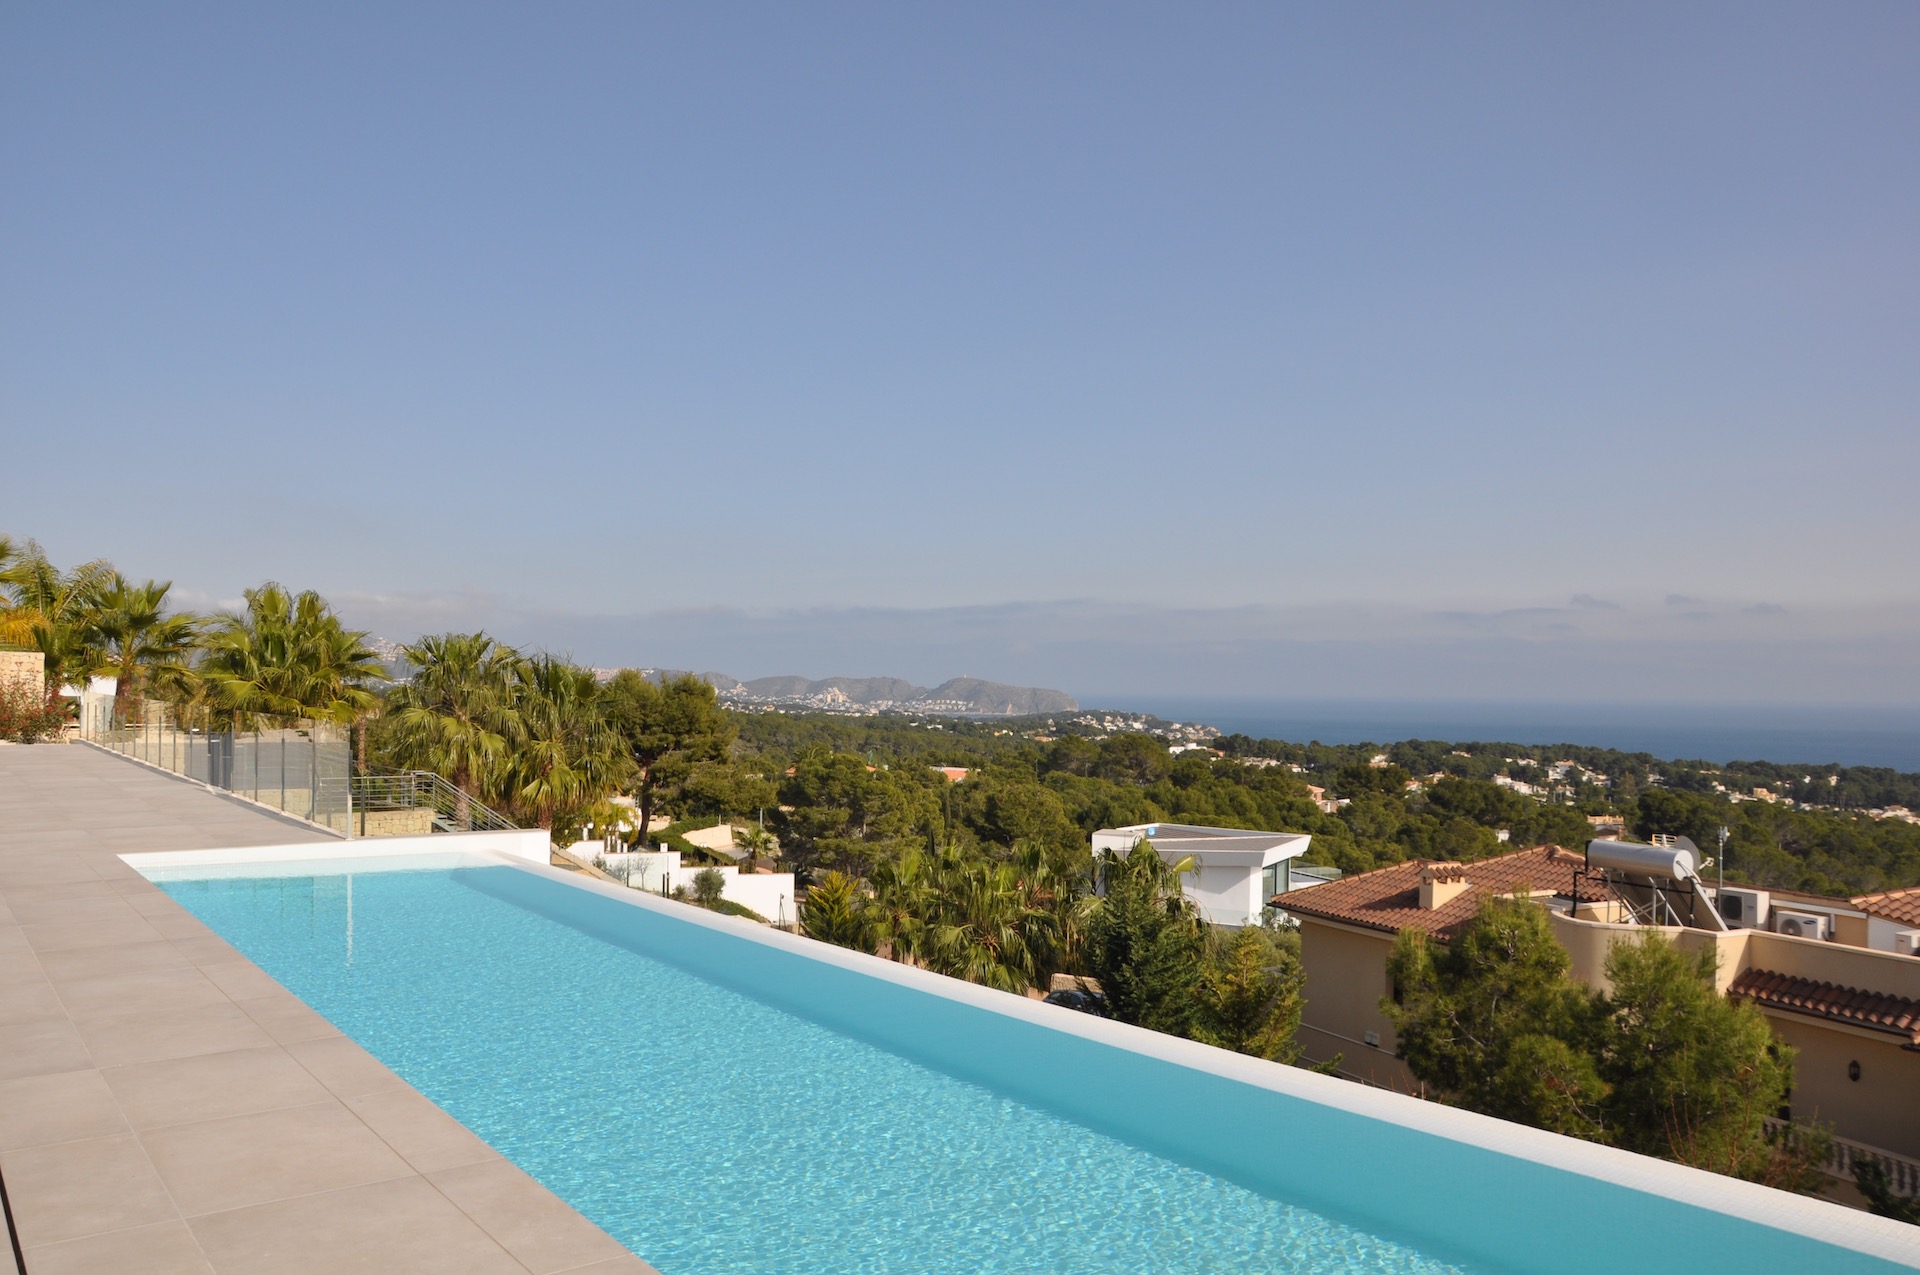 Fotogallerij - 11 - Exceptional homes in the Costa Blanca. Unparalleled Service. Exceptional properties in the Costa Blanca